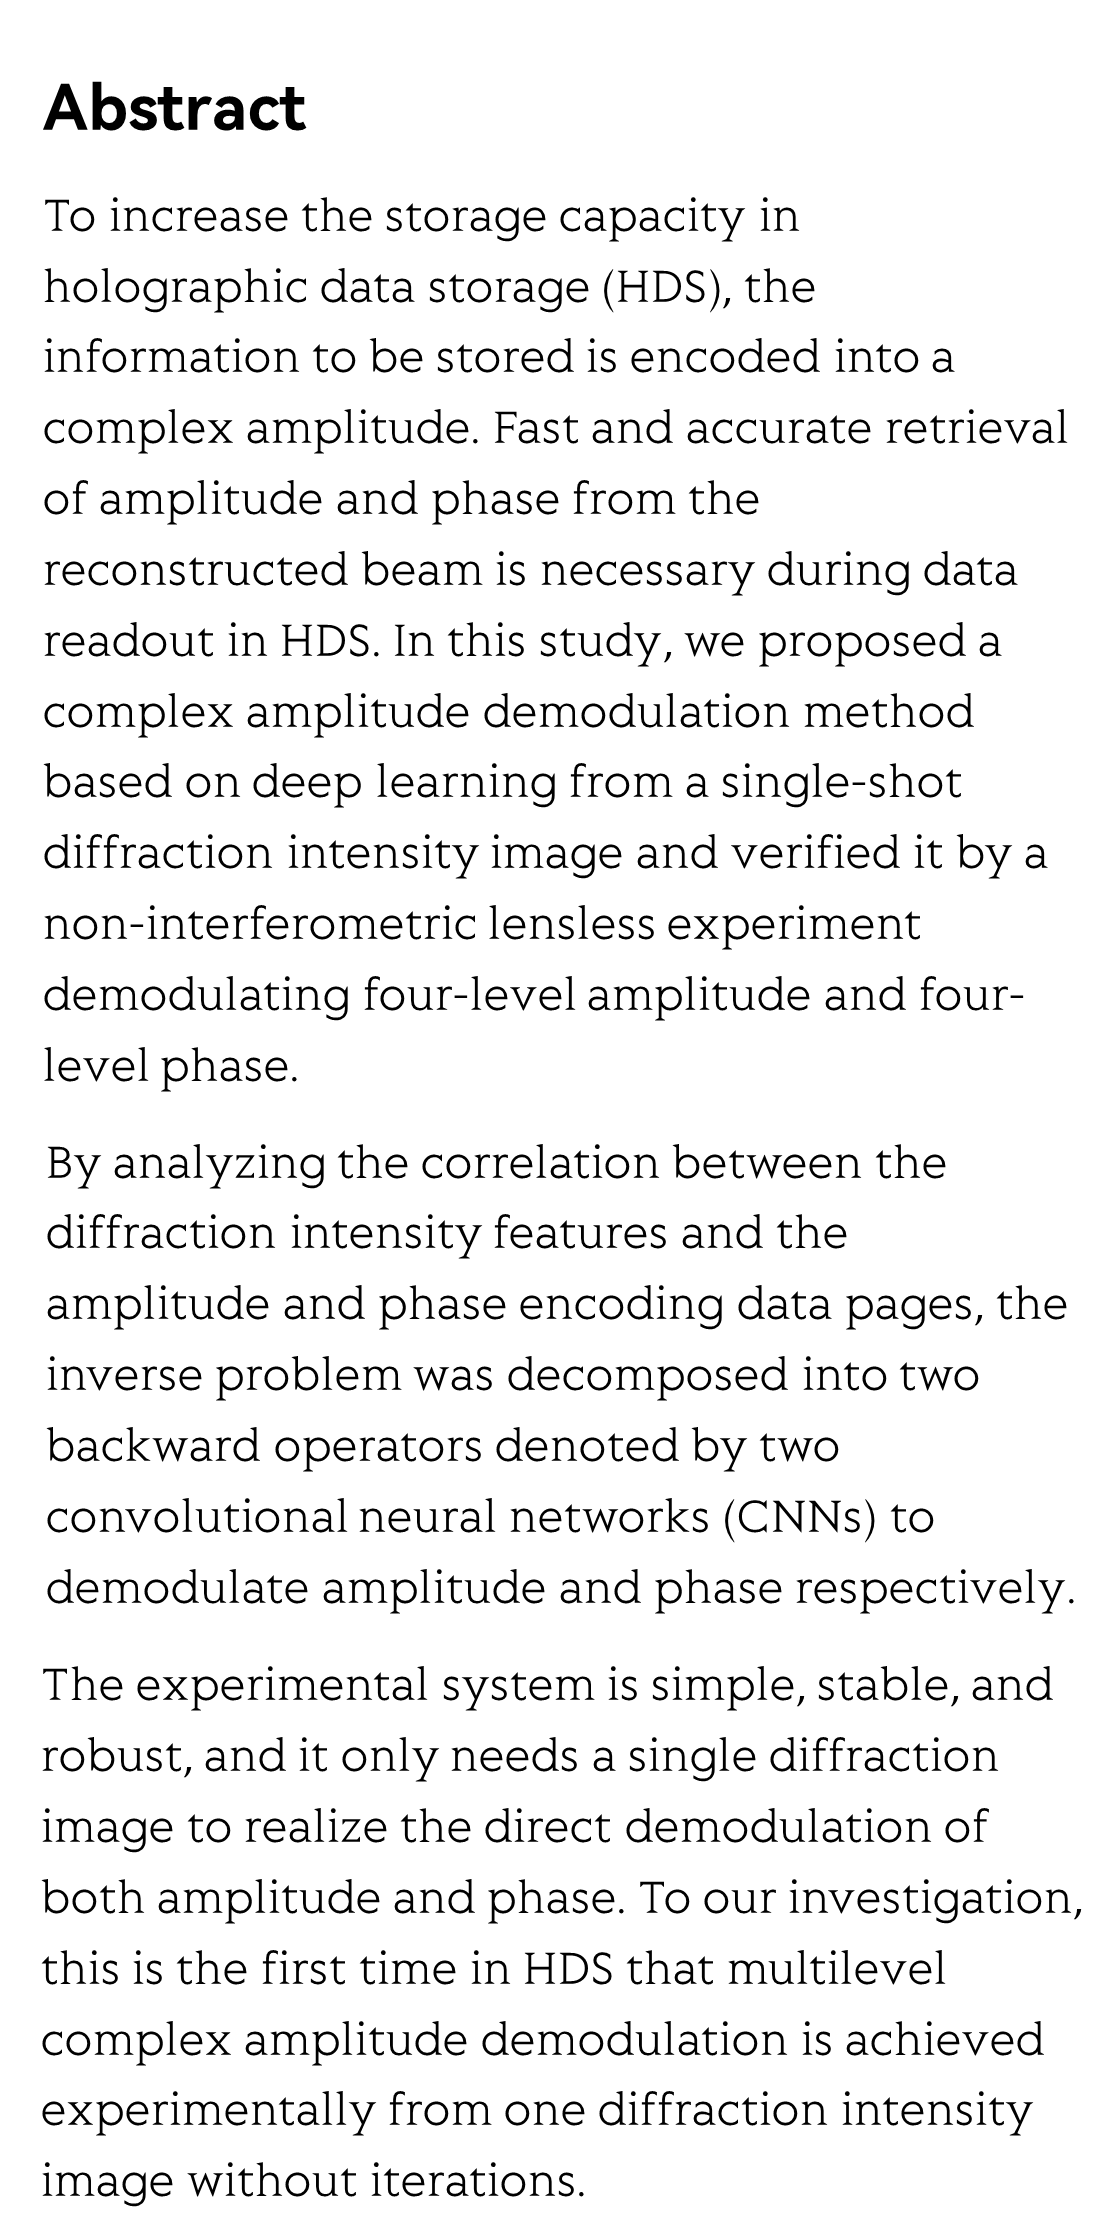 Lensless complex amplitude demodulation based on deep learning in holographic data storage_2